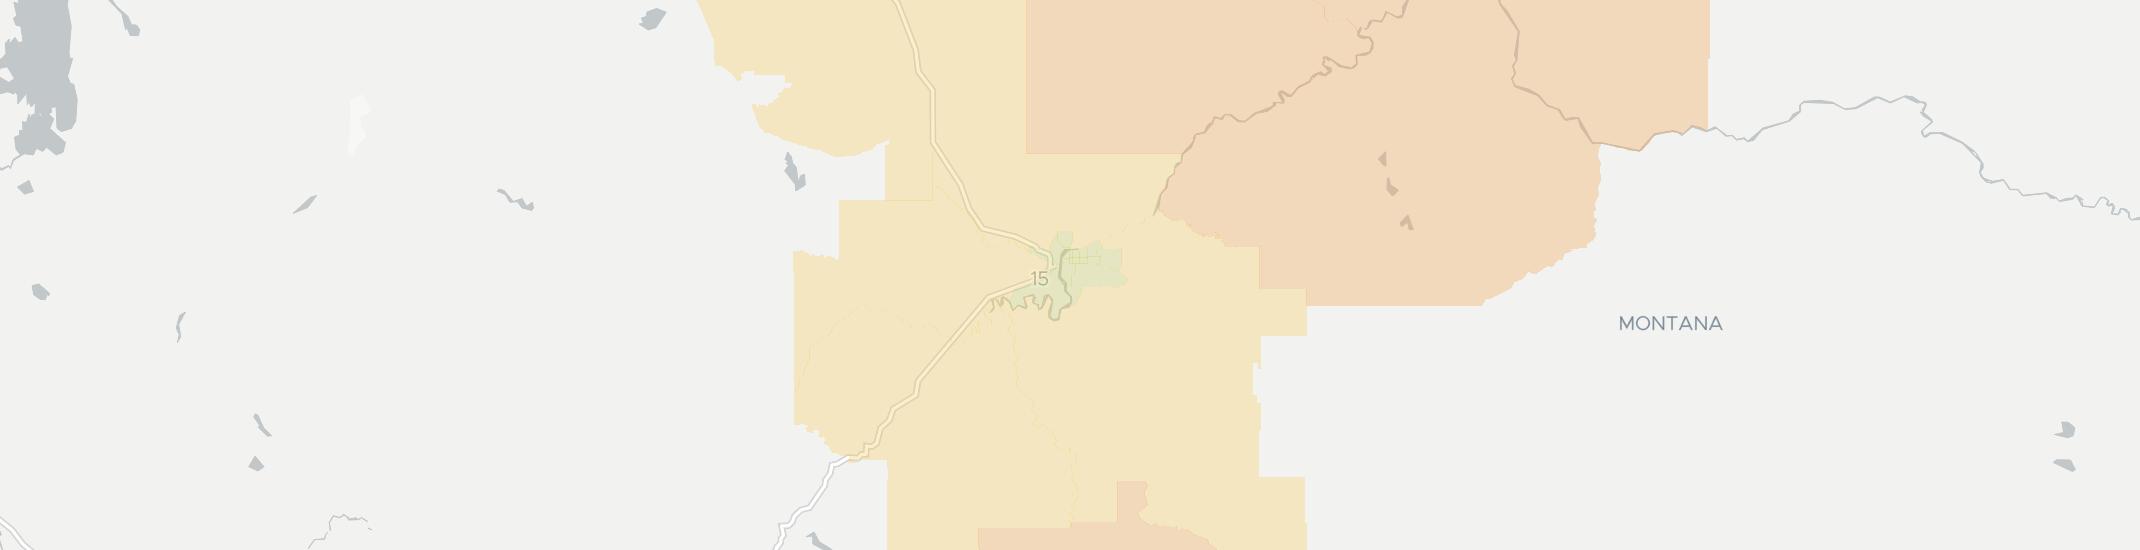 Great Falls Internet Competition Map. Click for interactive map